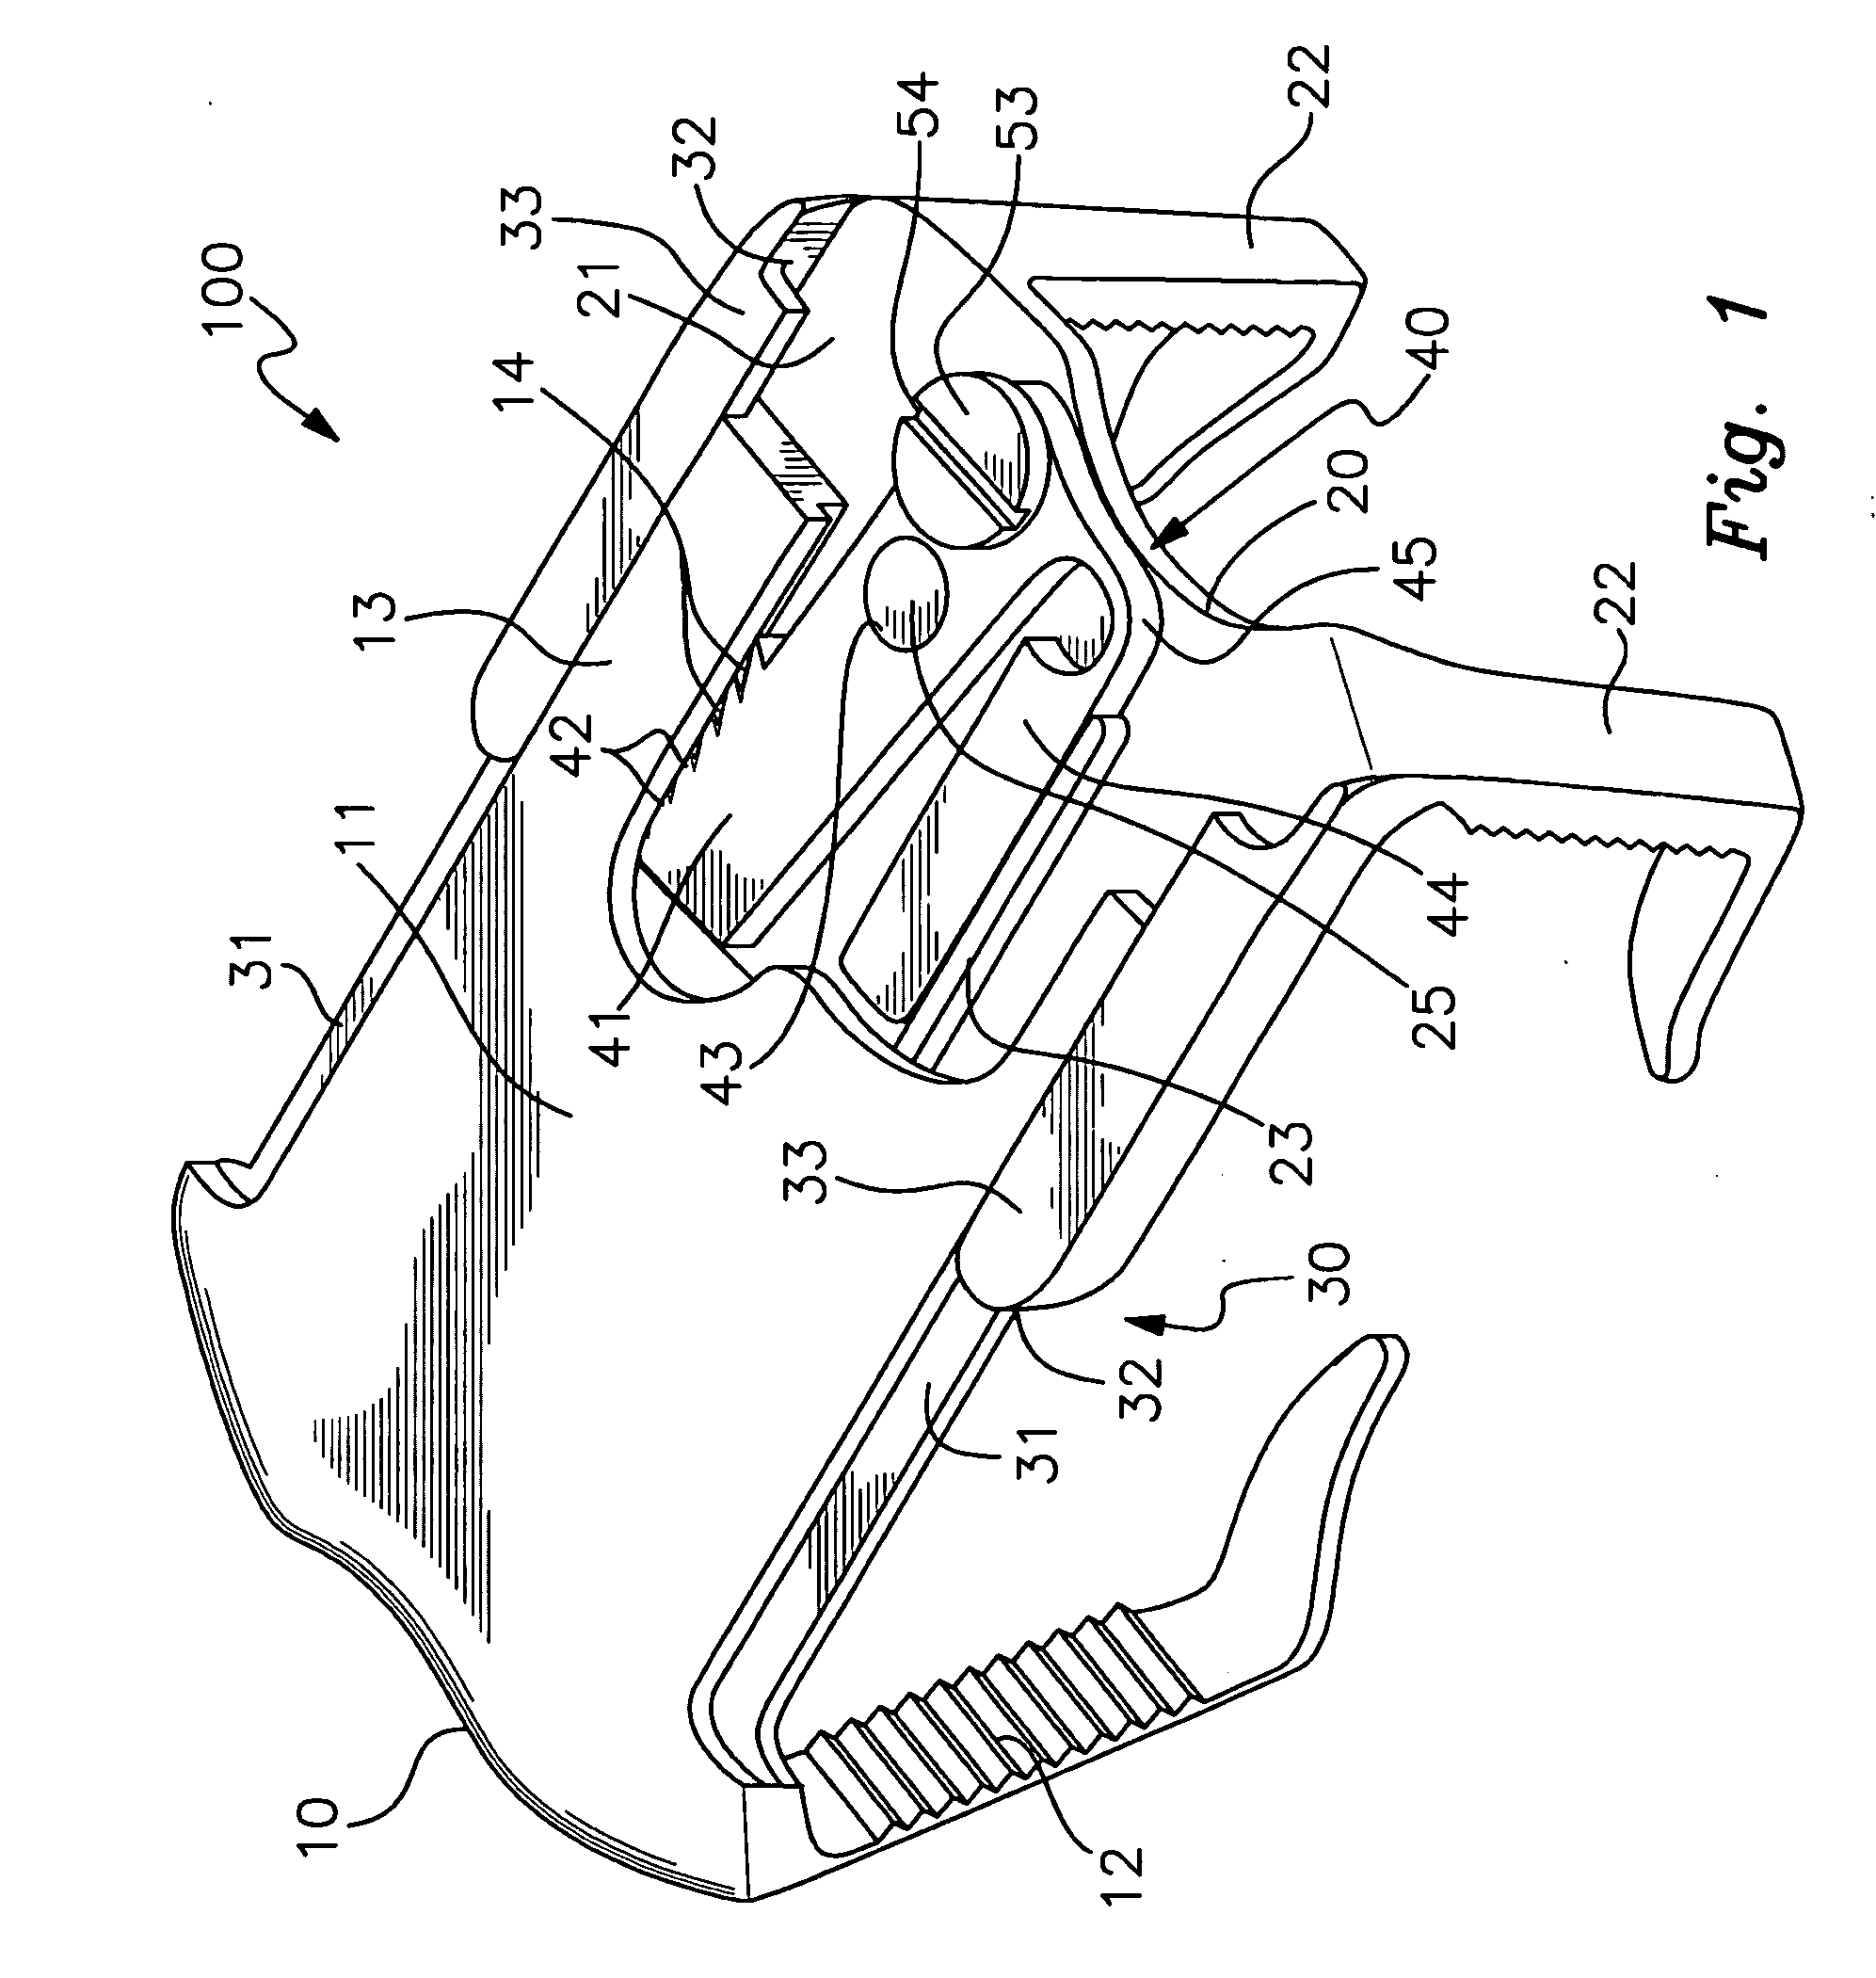 Lock and release mechanism for a sternal clamp